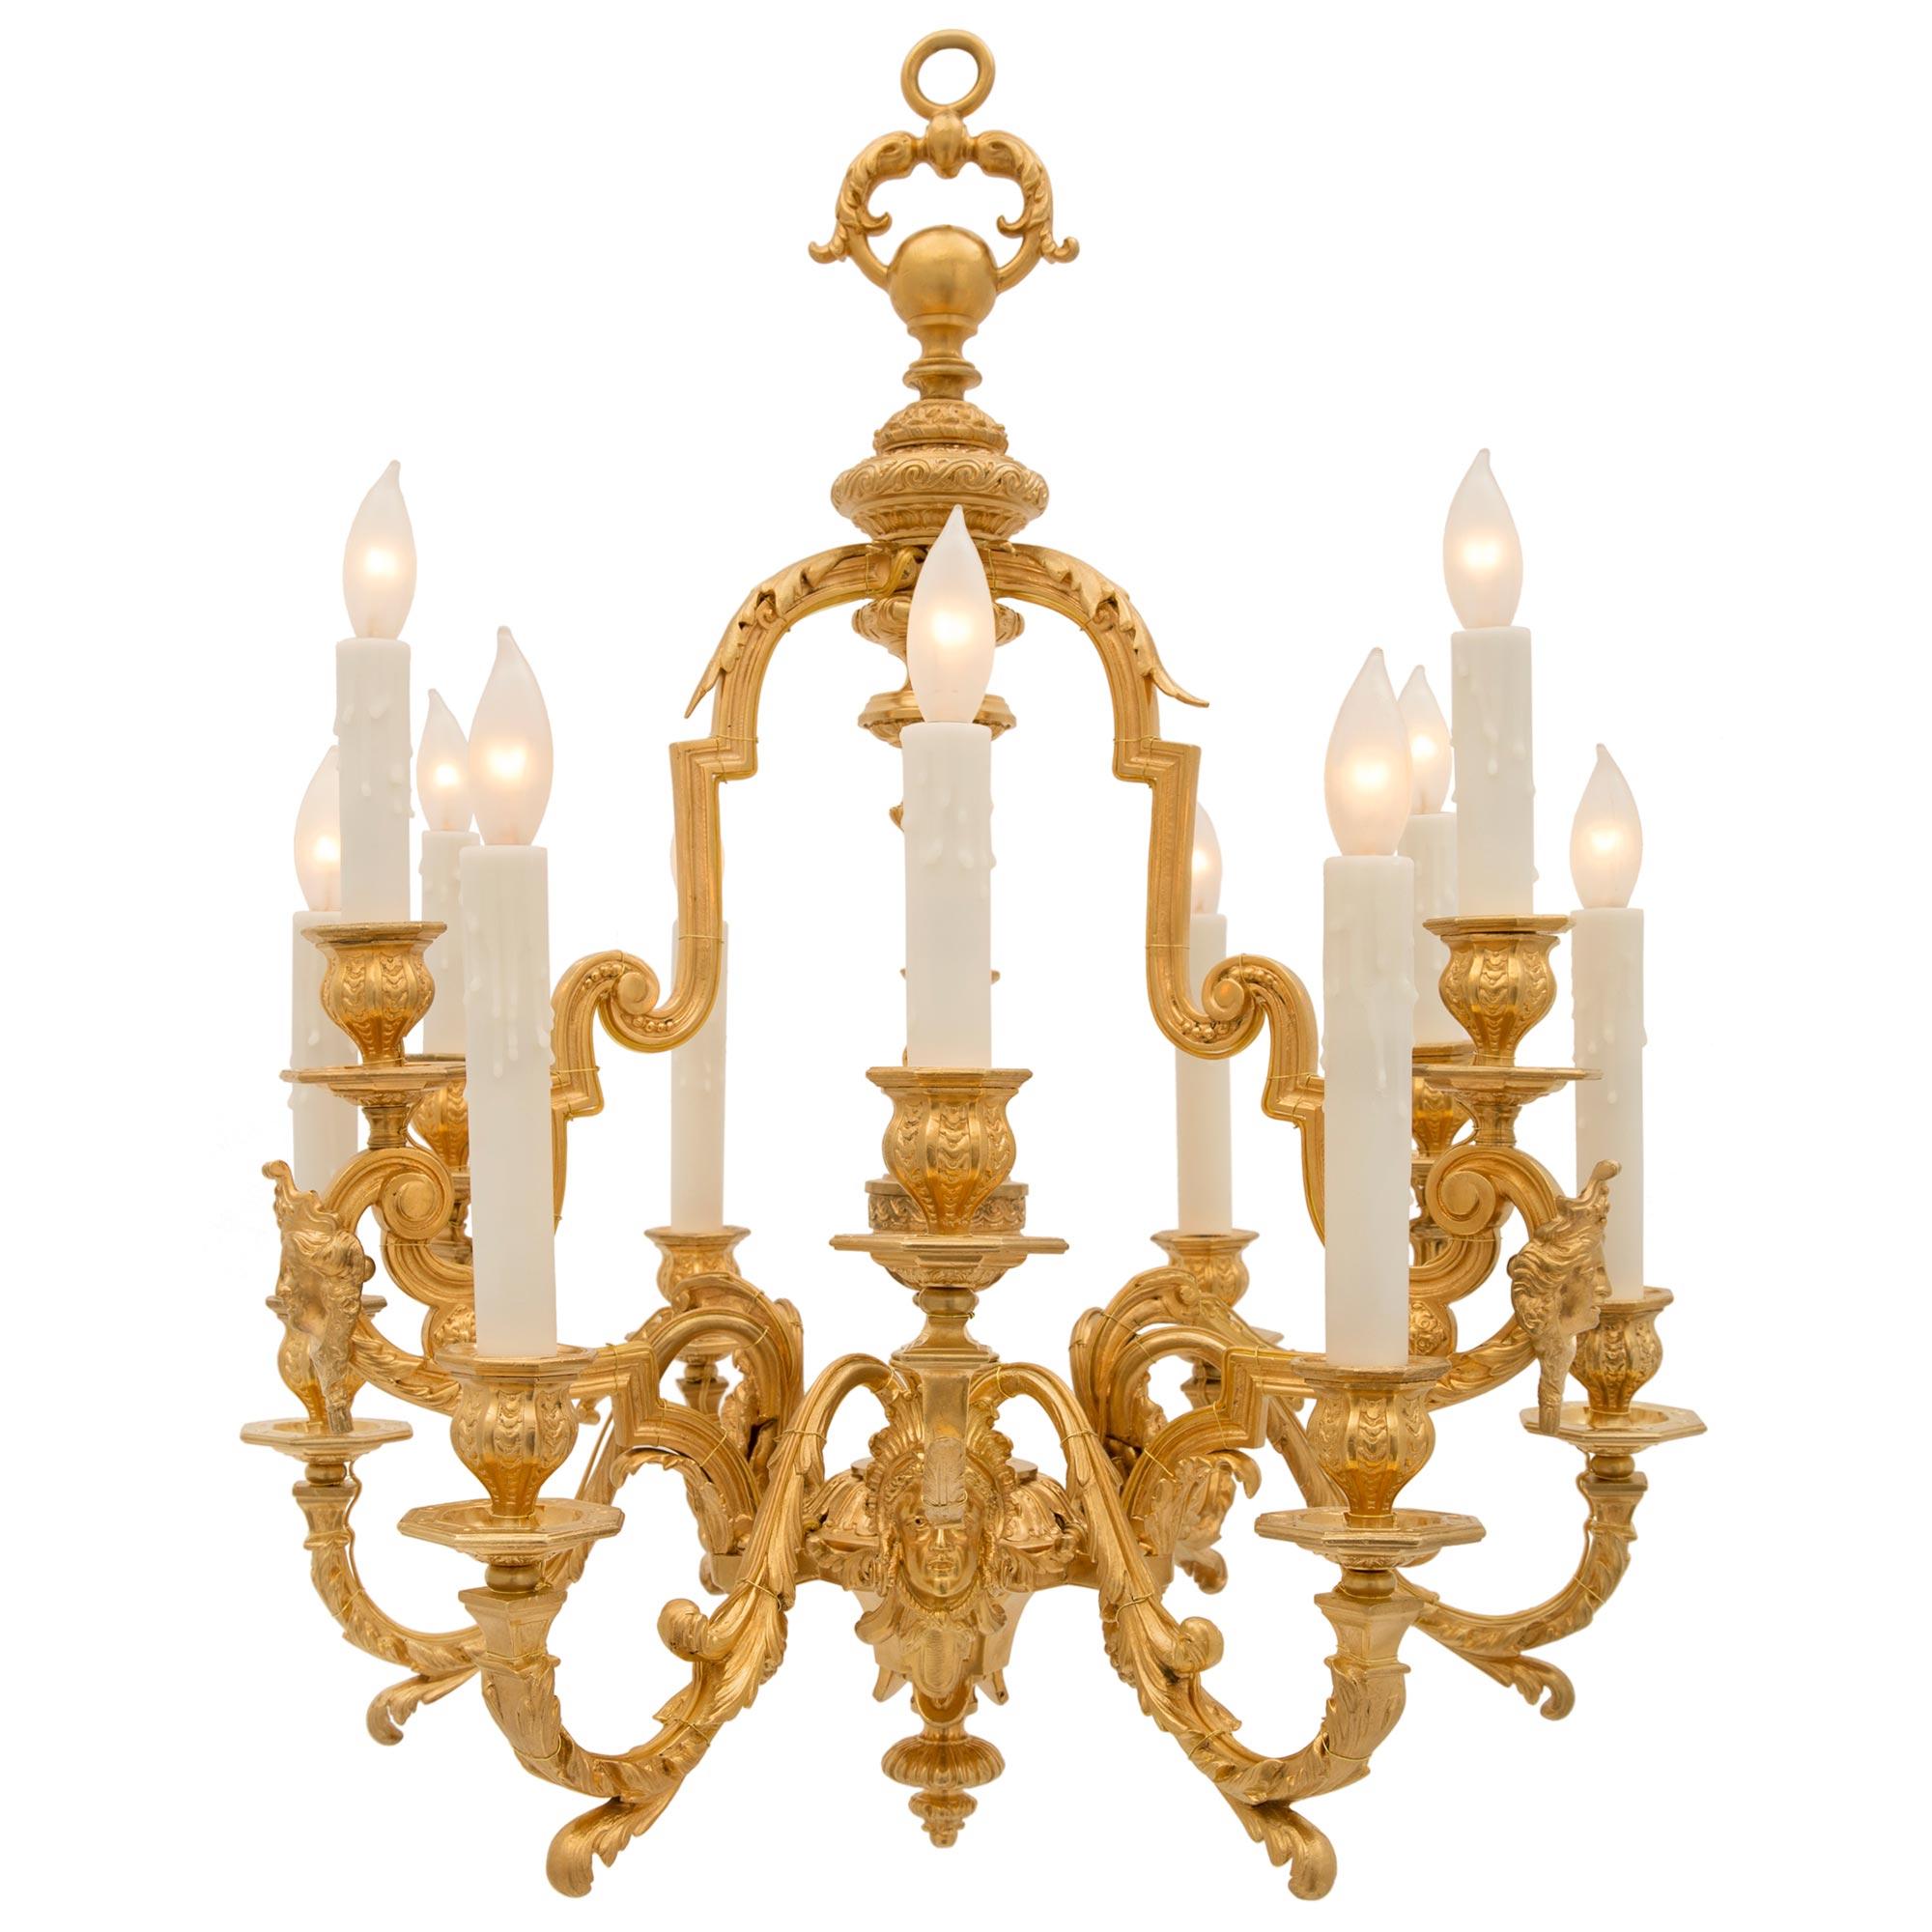 An impressive and most decorative French 19th century Louis XIV st. ormolu chandelier. The twelve arm chandelier is centered by an elegant bottom mottled final below finely detailed foliate designs centered by lovely acorn finials. The twelve arms